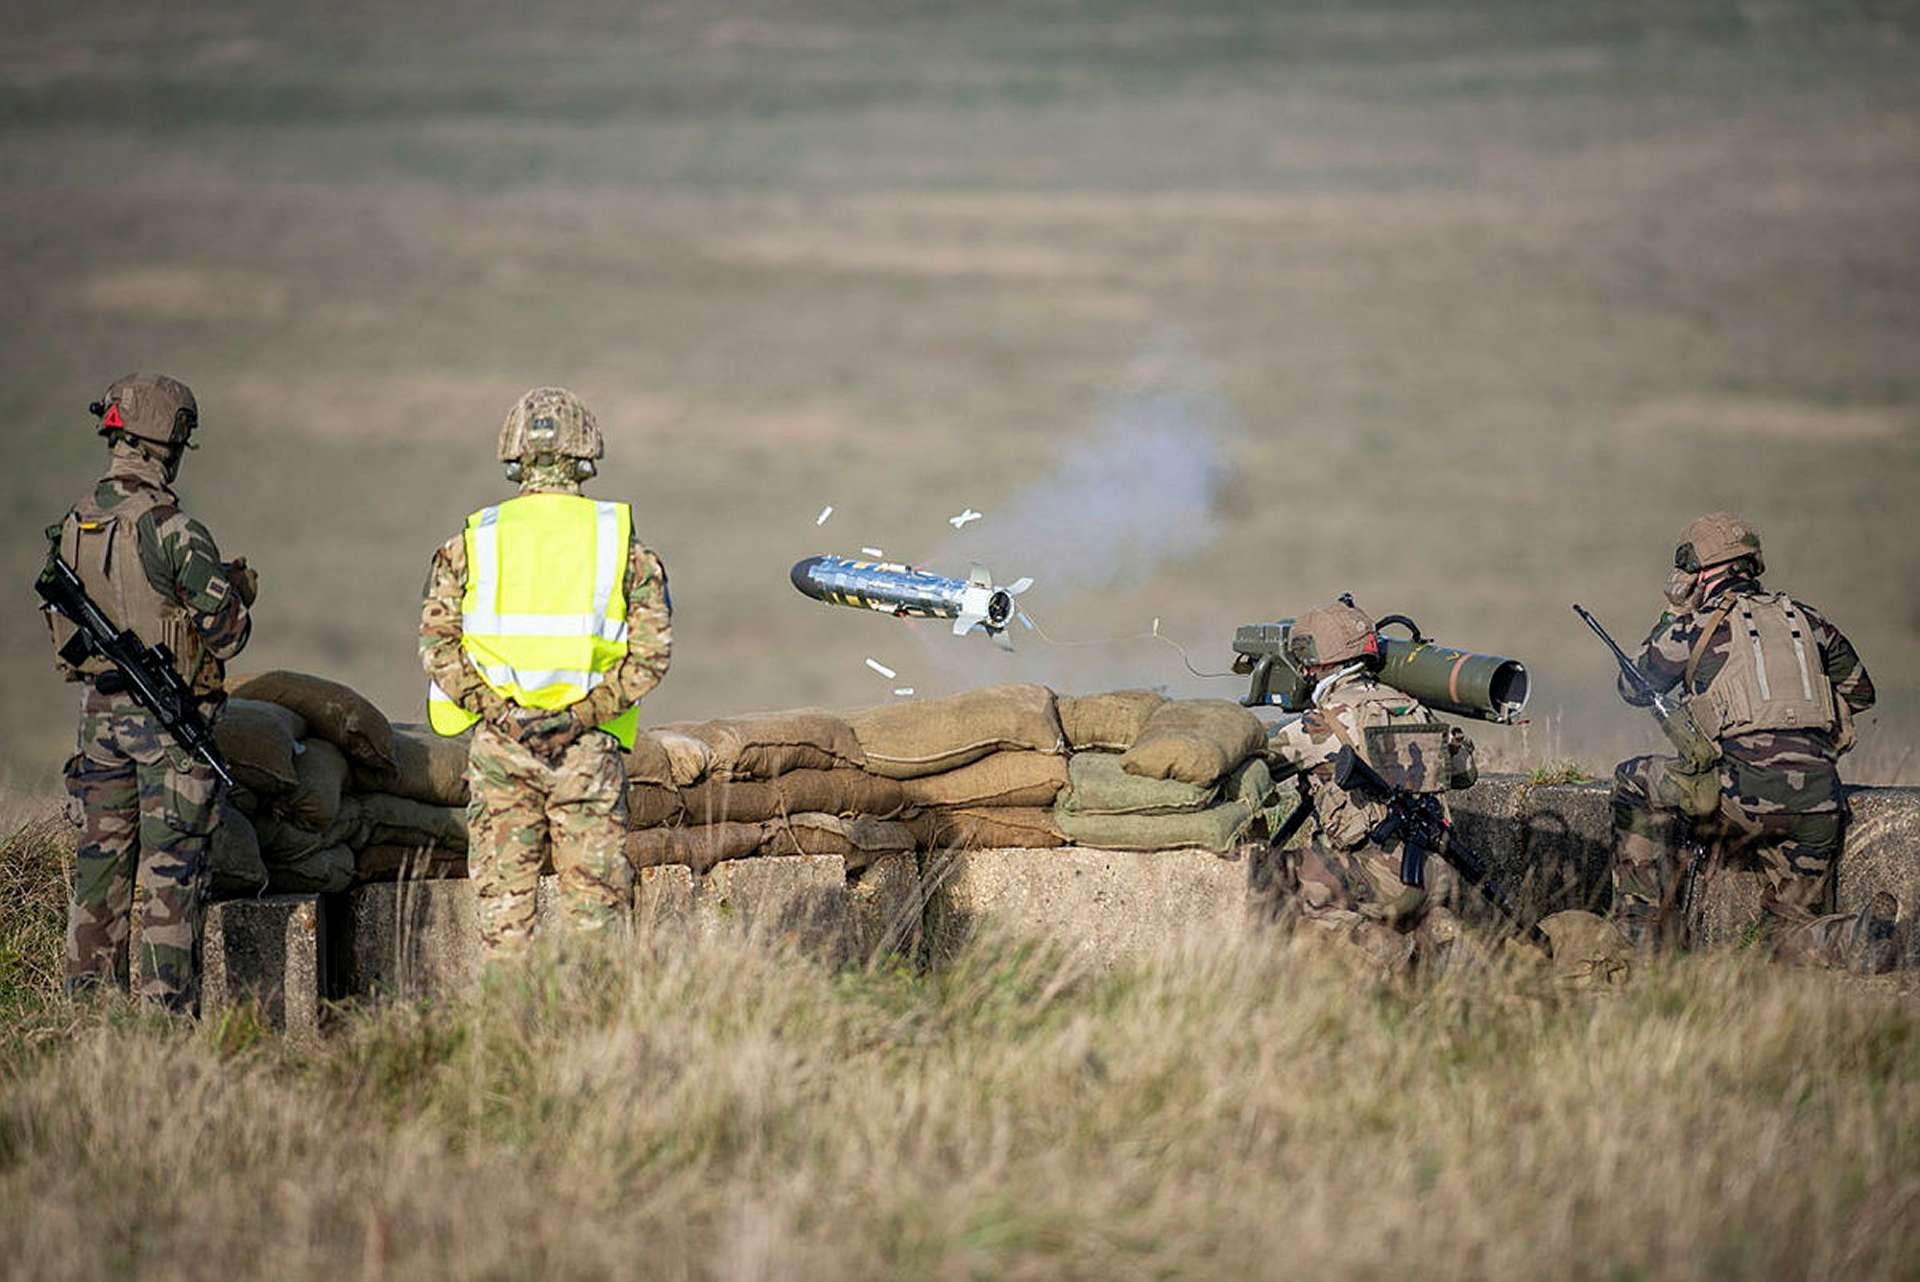 French Army to replace French Eryx anti-tank missiles with Swedish NLAW ...